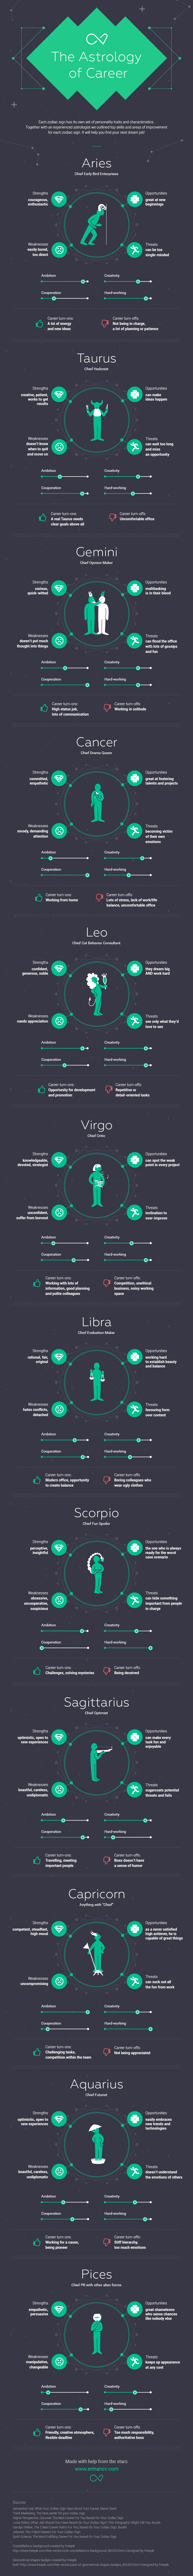 How Does Your Zodiac Sign Influence Your Career? - Enhancv